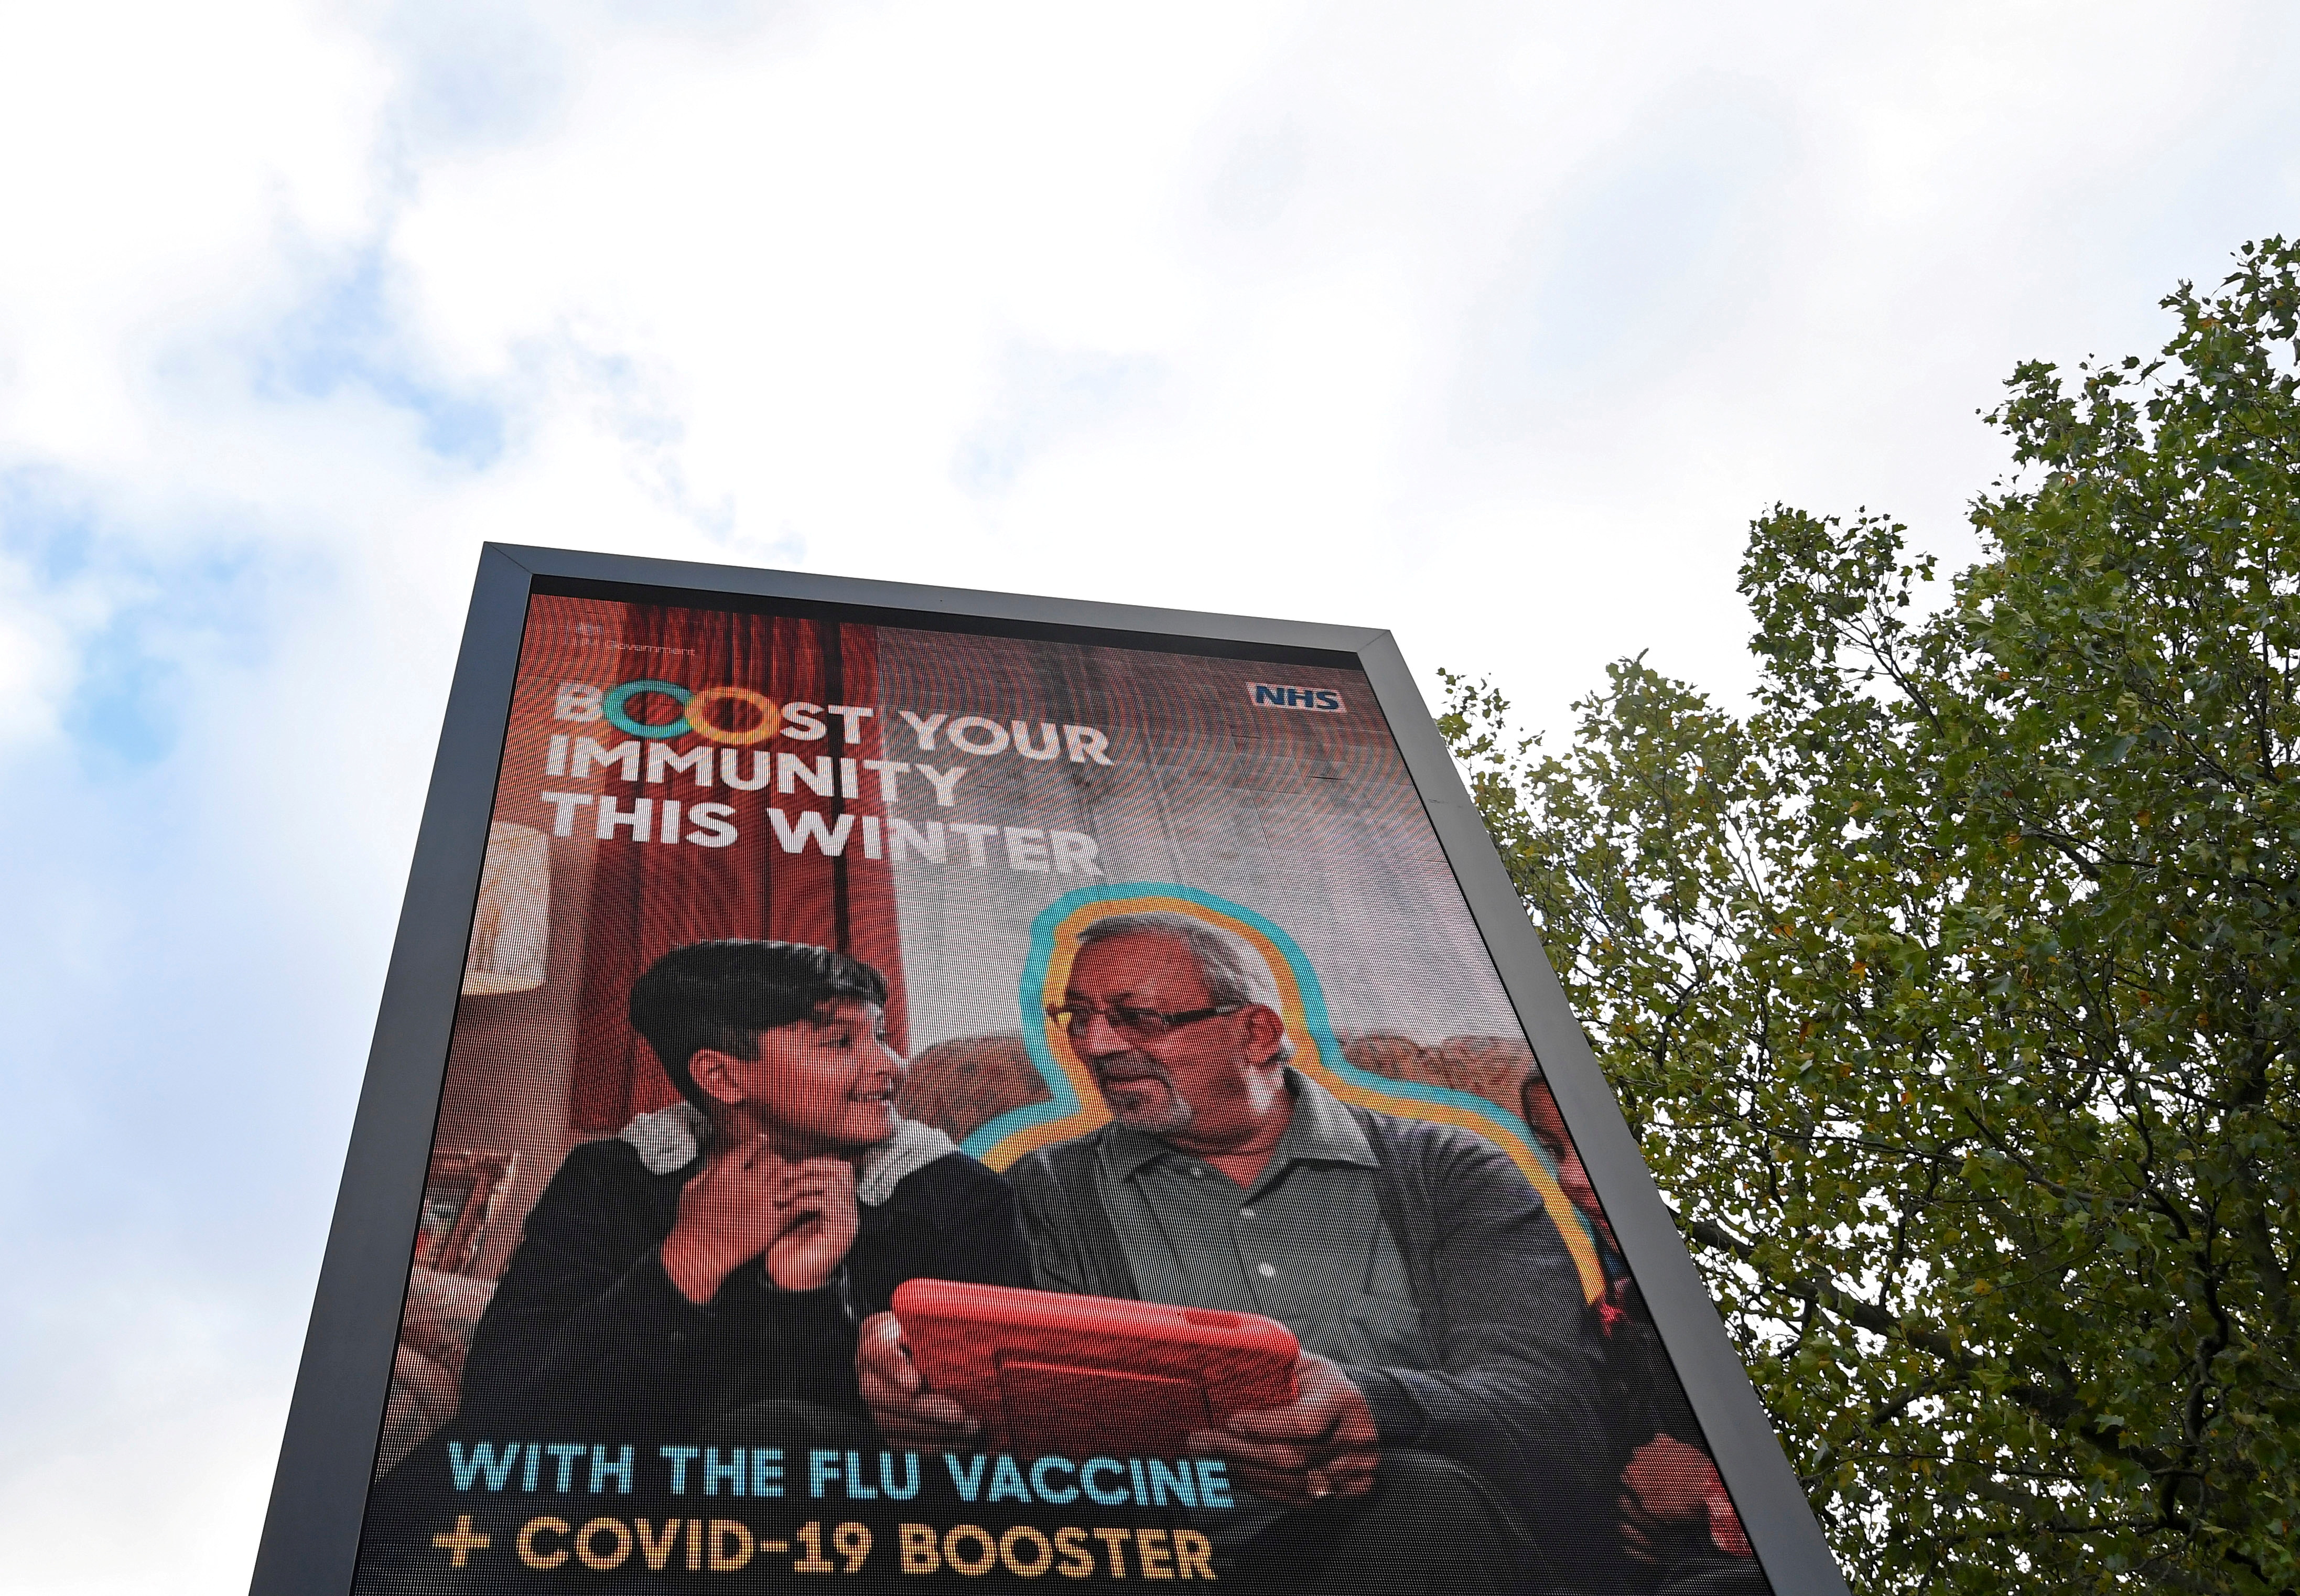 An NHS COVID-19 vaccination health campaign advertisement is displayed, amidst the spread of the coronavirus disease (COVID-19), in London, Britain, October 21, 2021. REUTERS/Toby Melville/File Photo